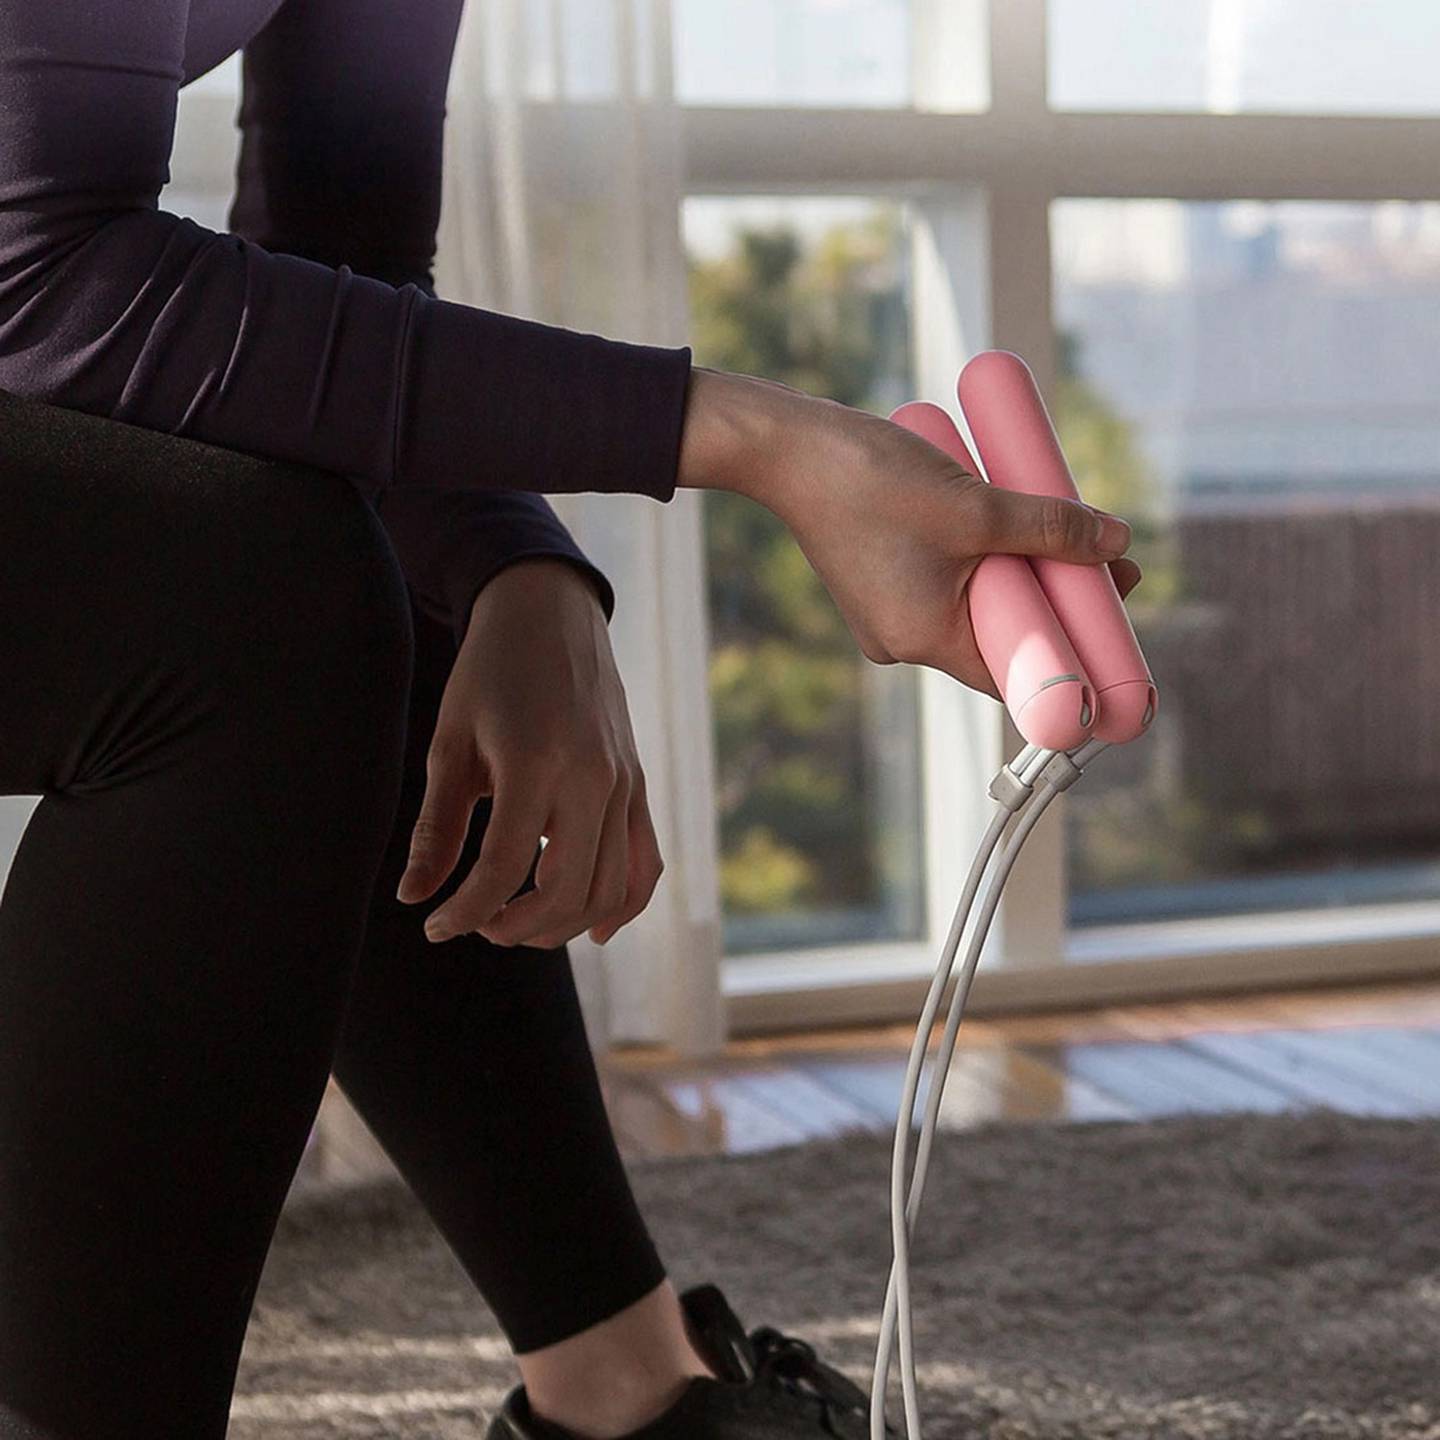 A woman holds a skipping rope